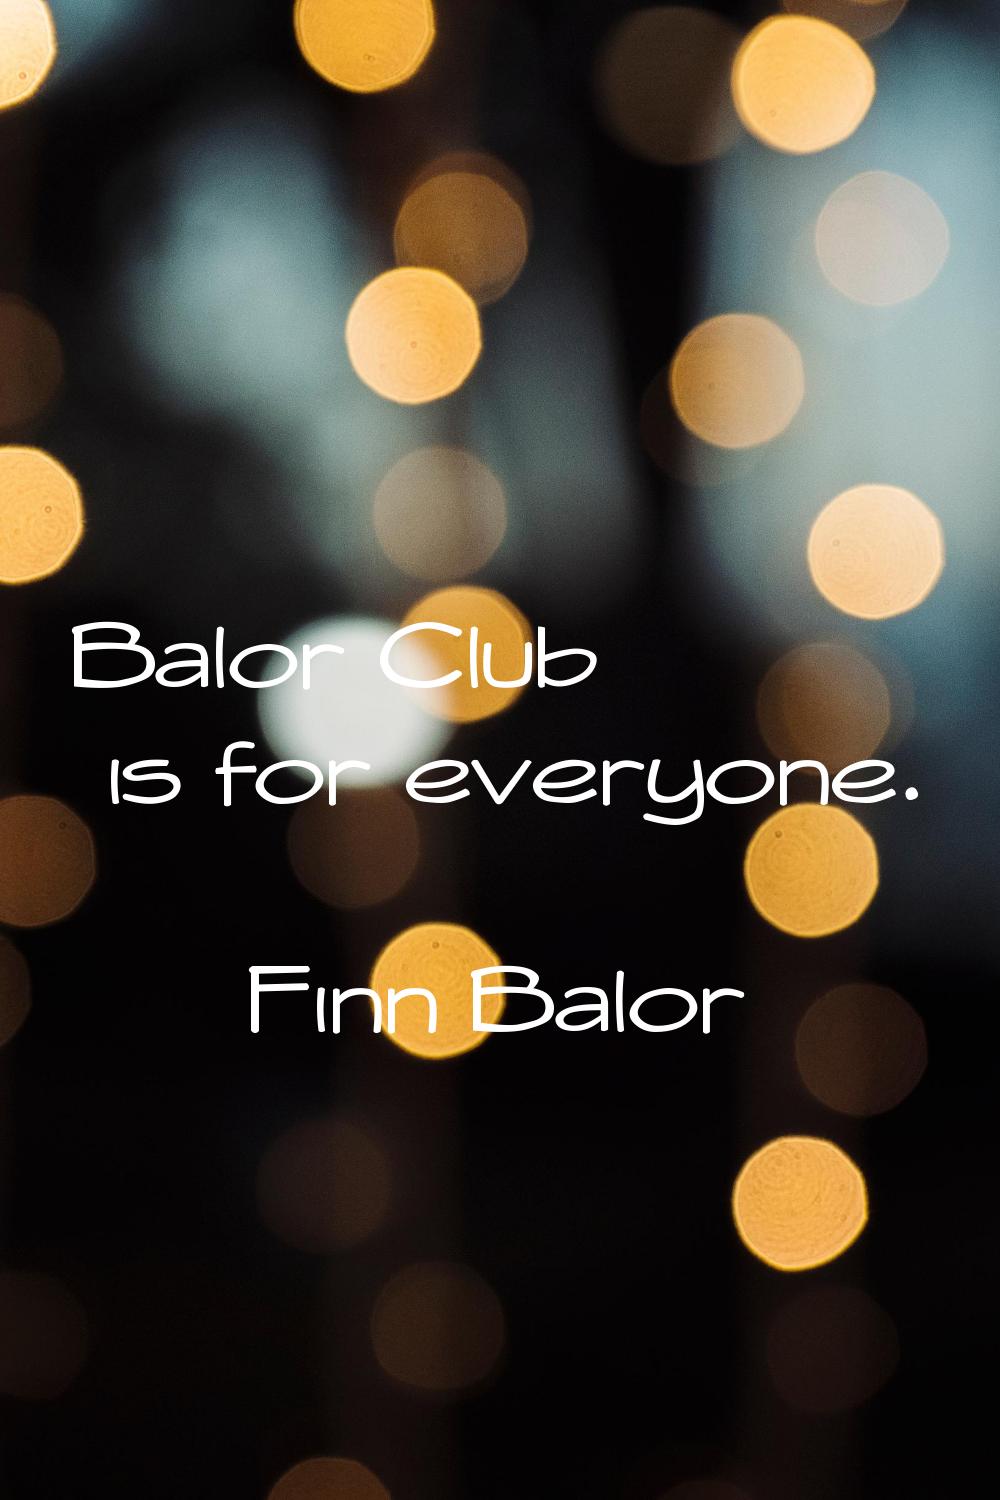 Balor Club is for everyone.